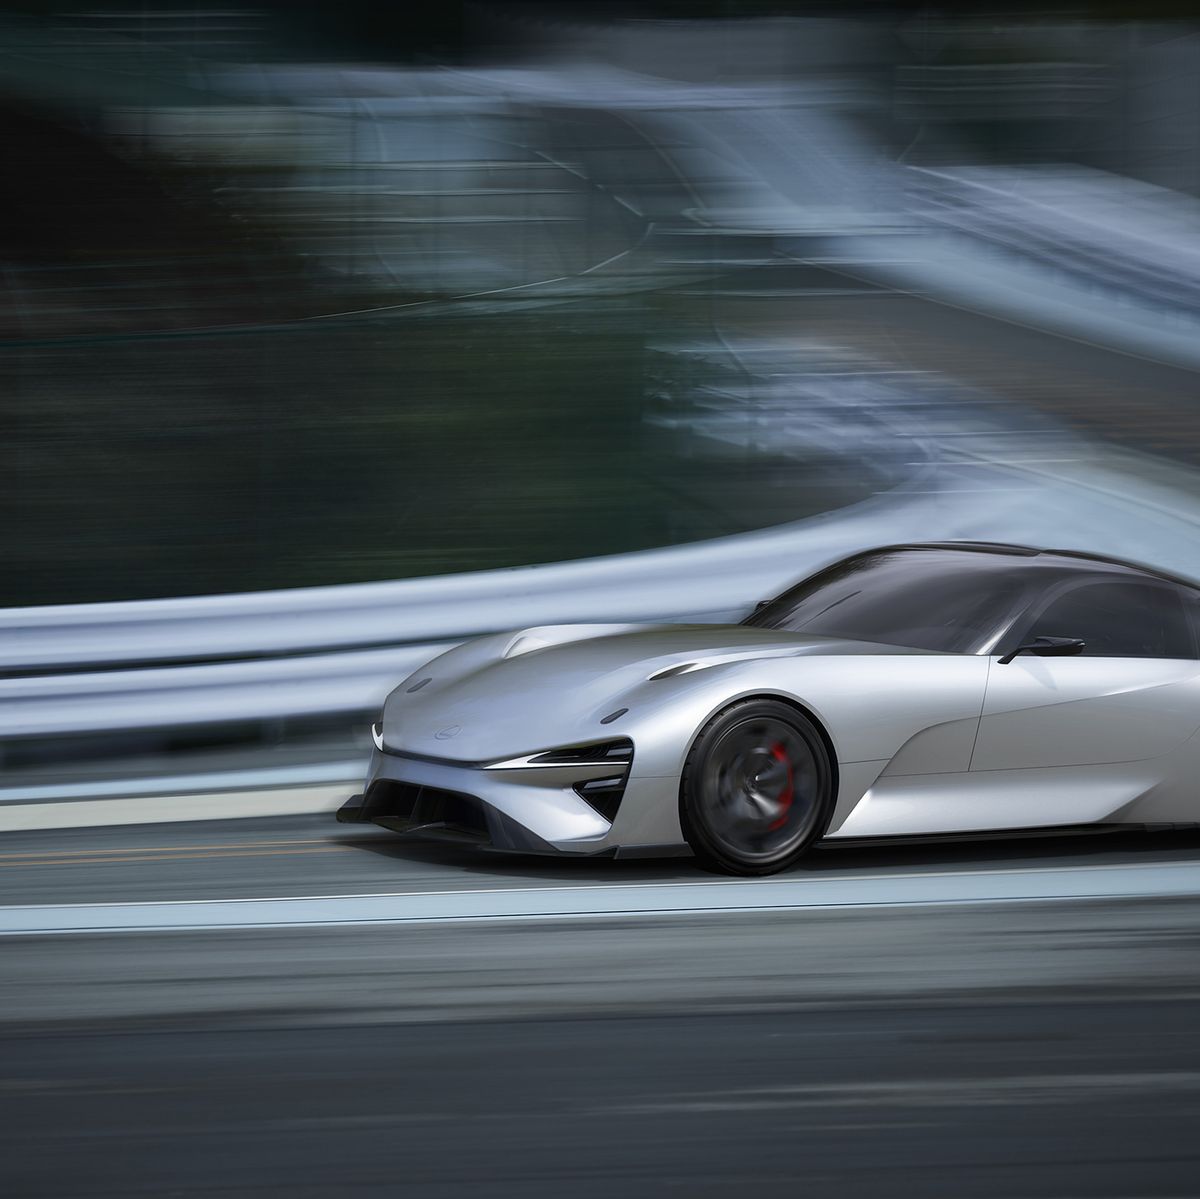 Lexus Shoots for 430 Miles of Range with Future Electric Sports Car